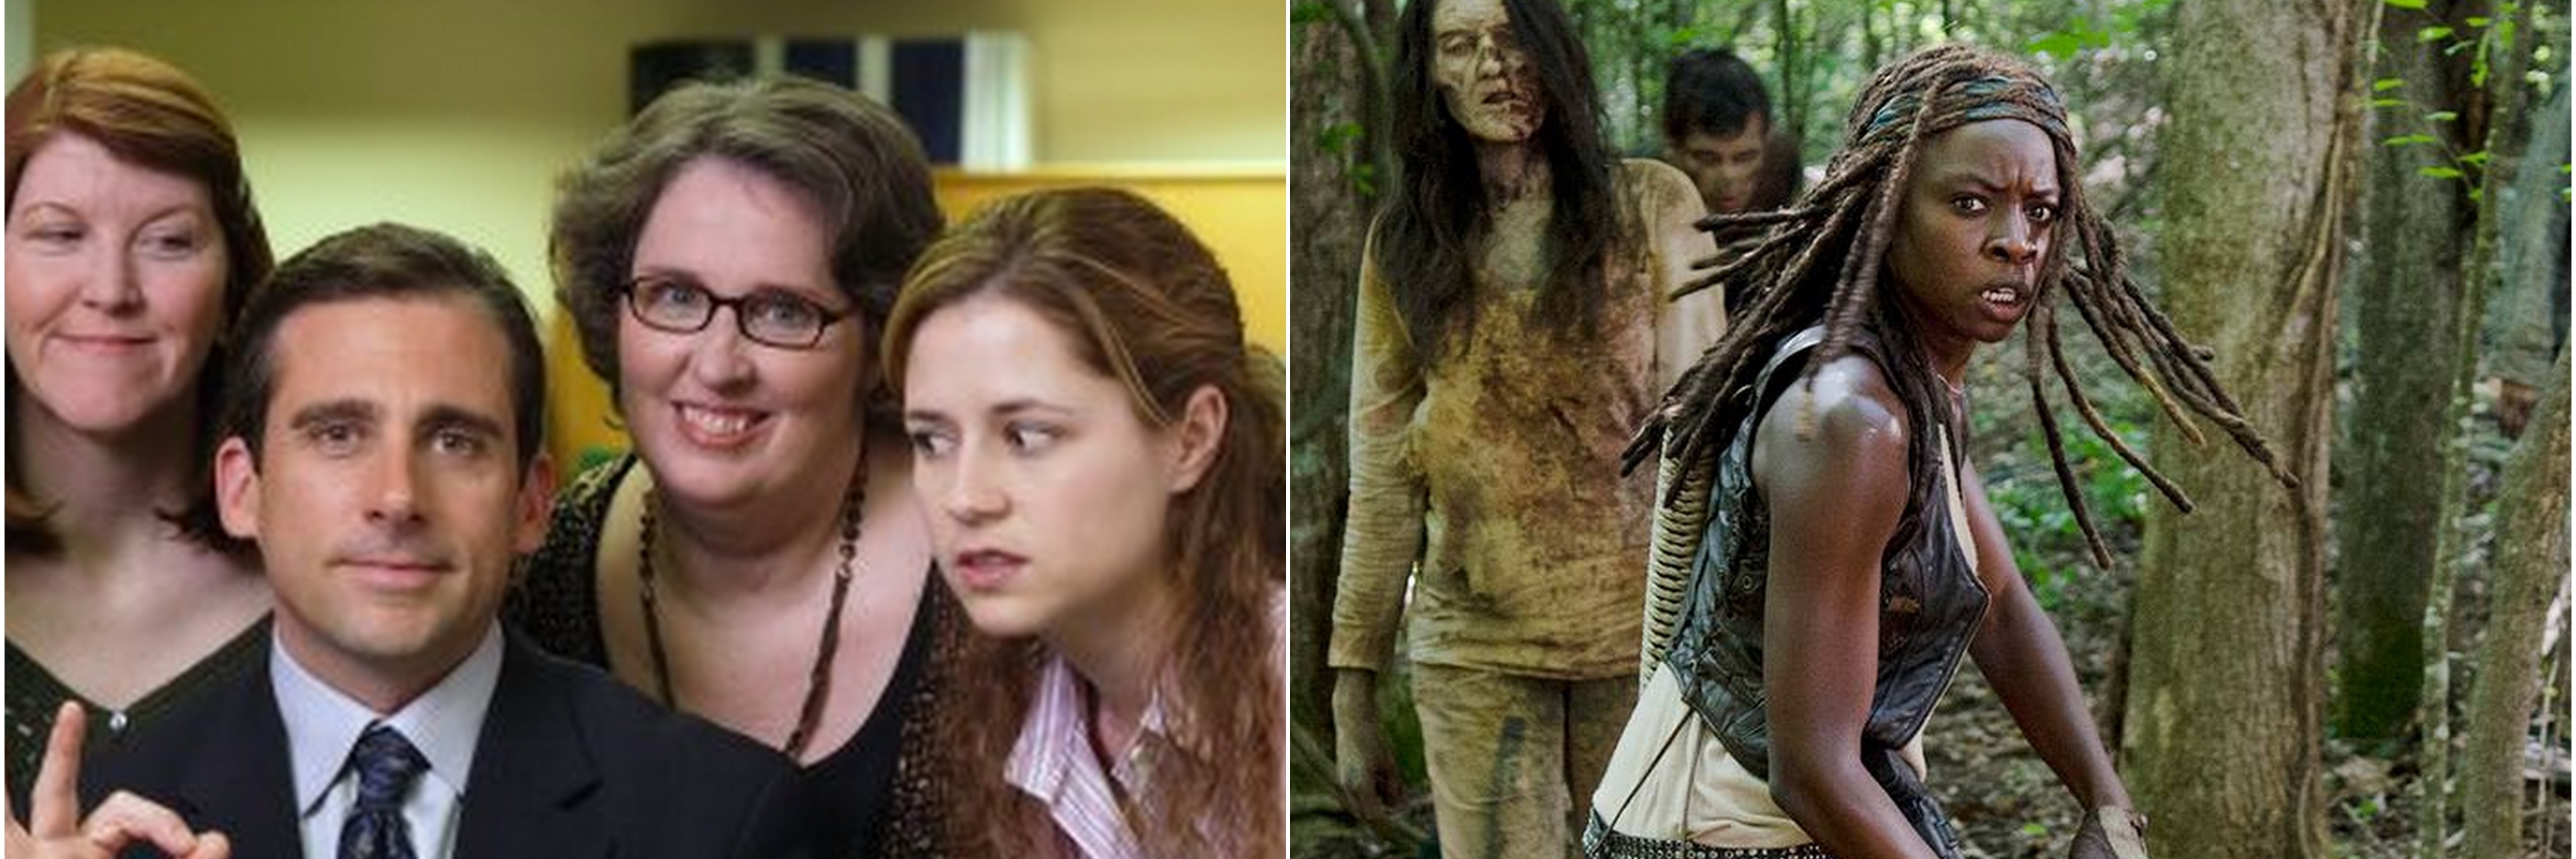 the office and the walking dead images